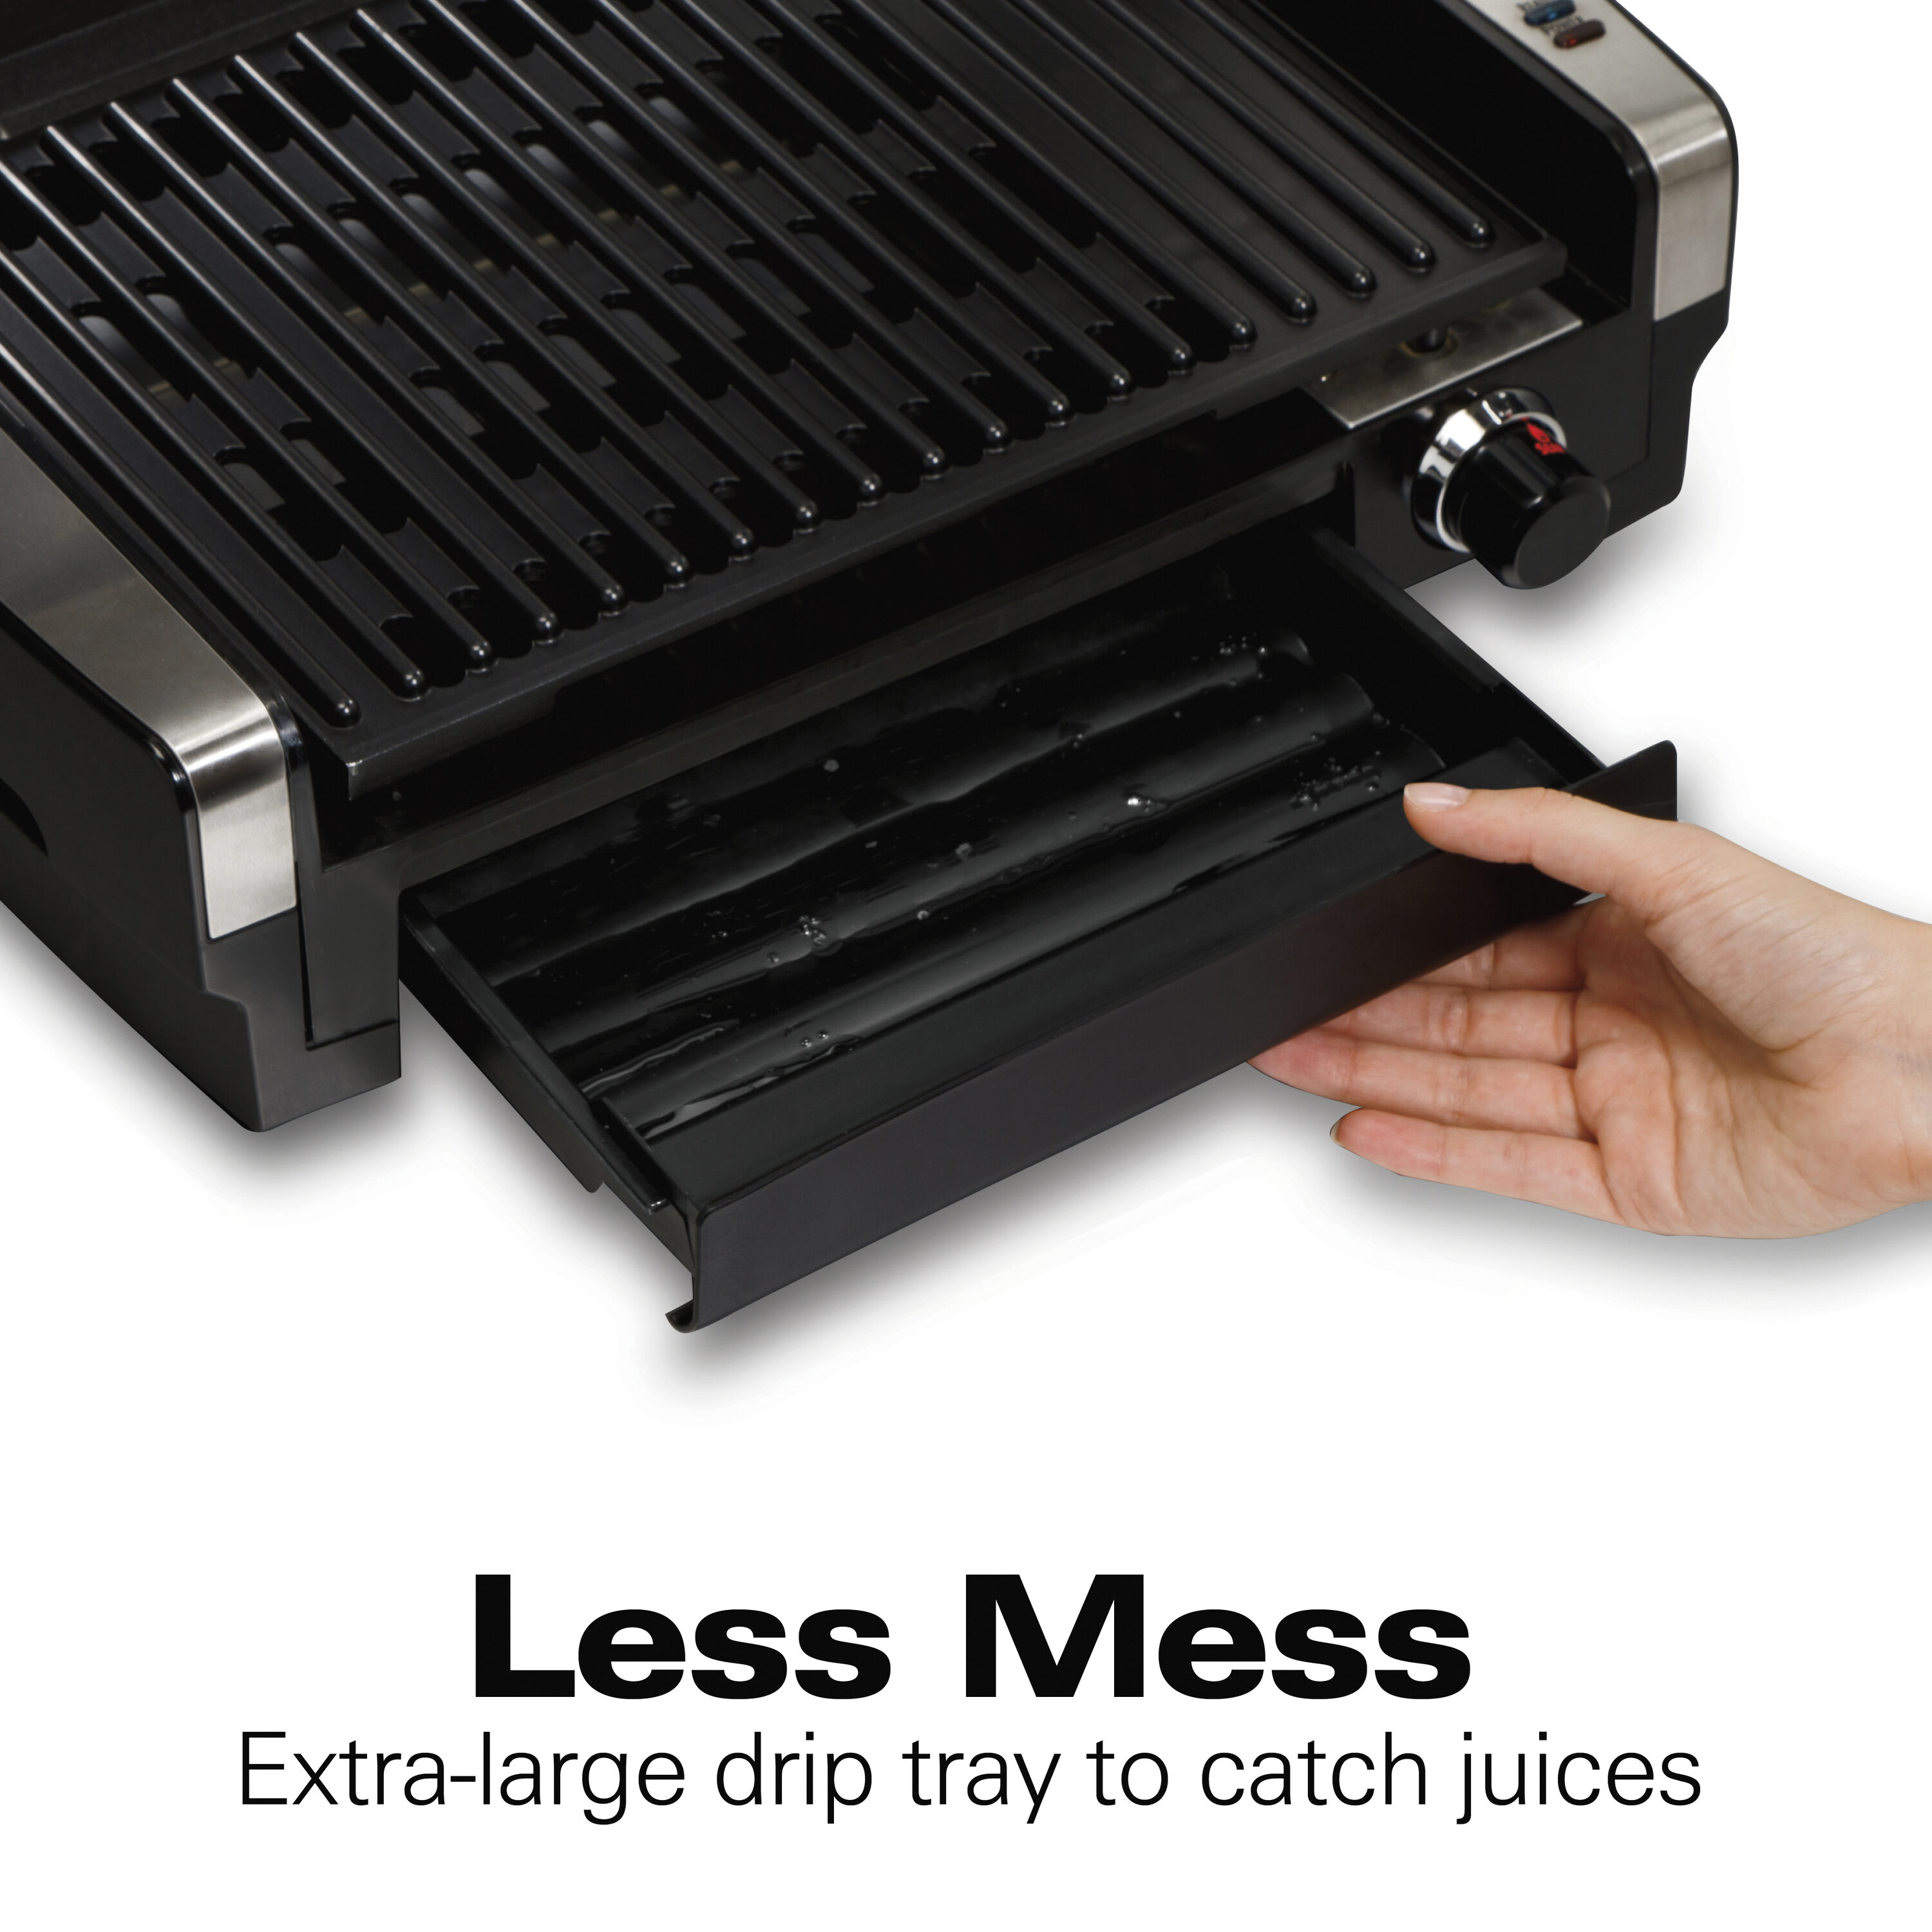 Hamilton Beach® Dual Zone 3-in-1 Griddle/Grill-JCPenney, Color: Black